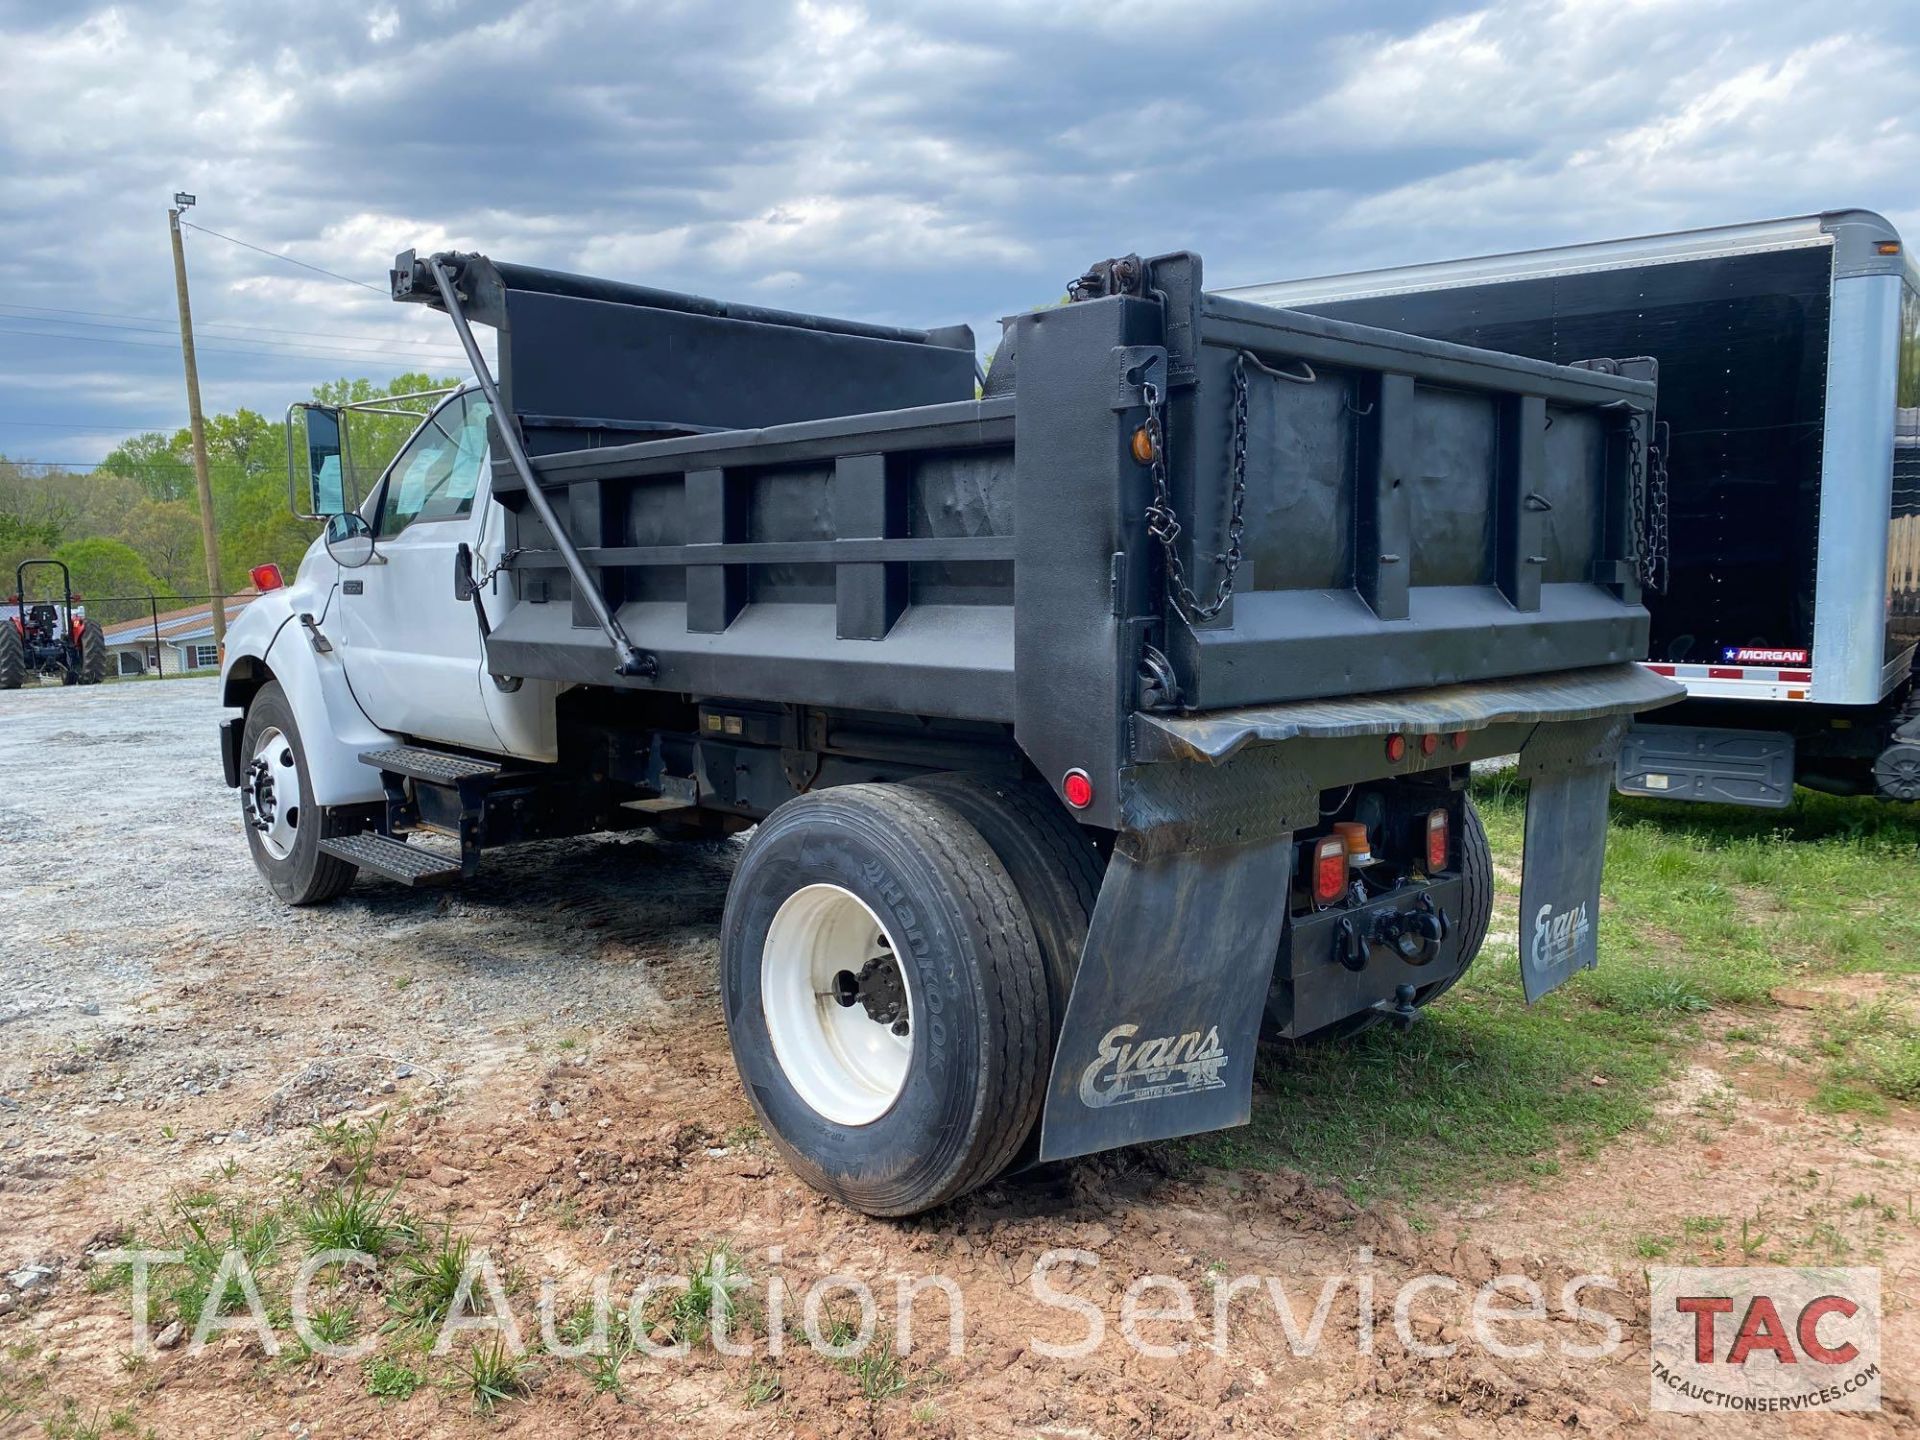 2004 Ford F-650 Dump Truck - Image 11 of 51